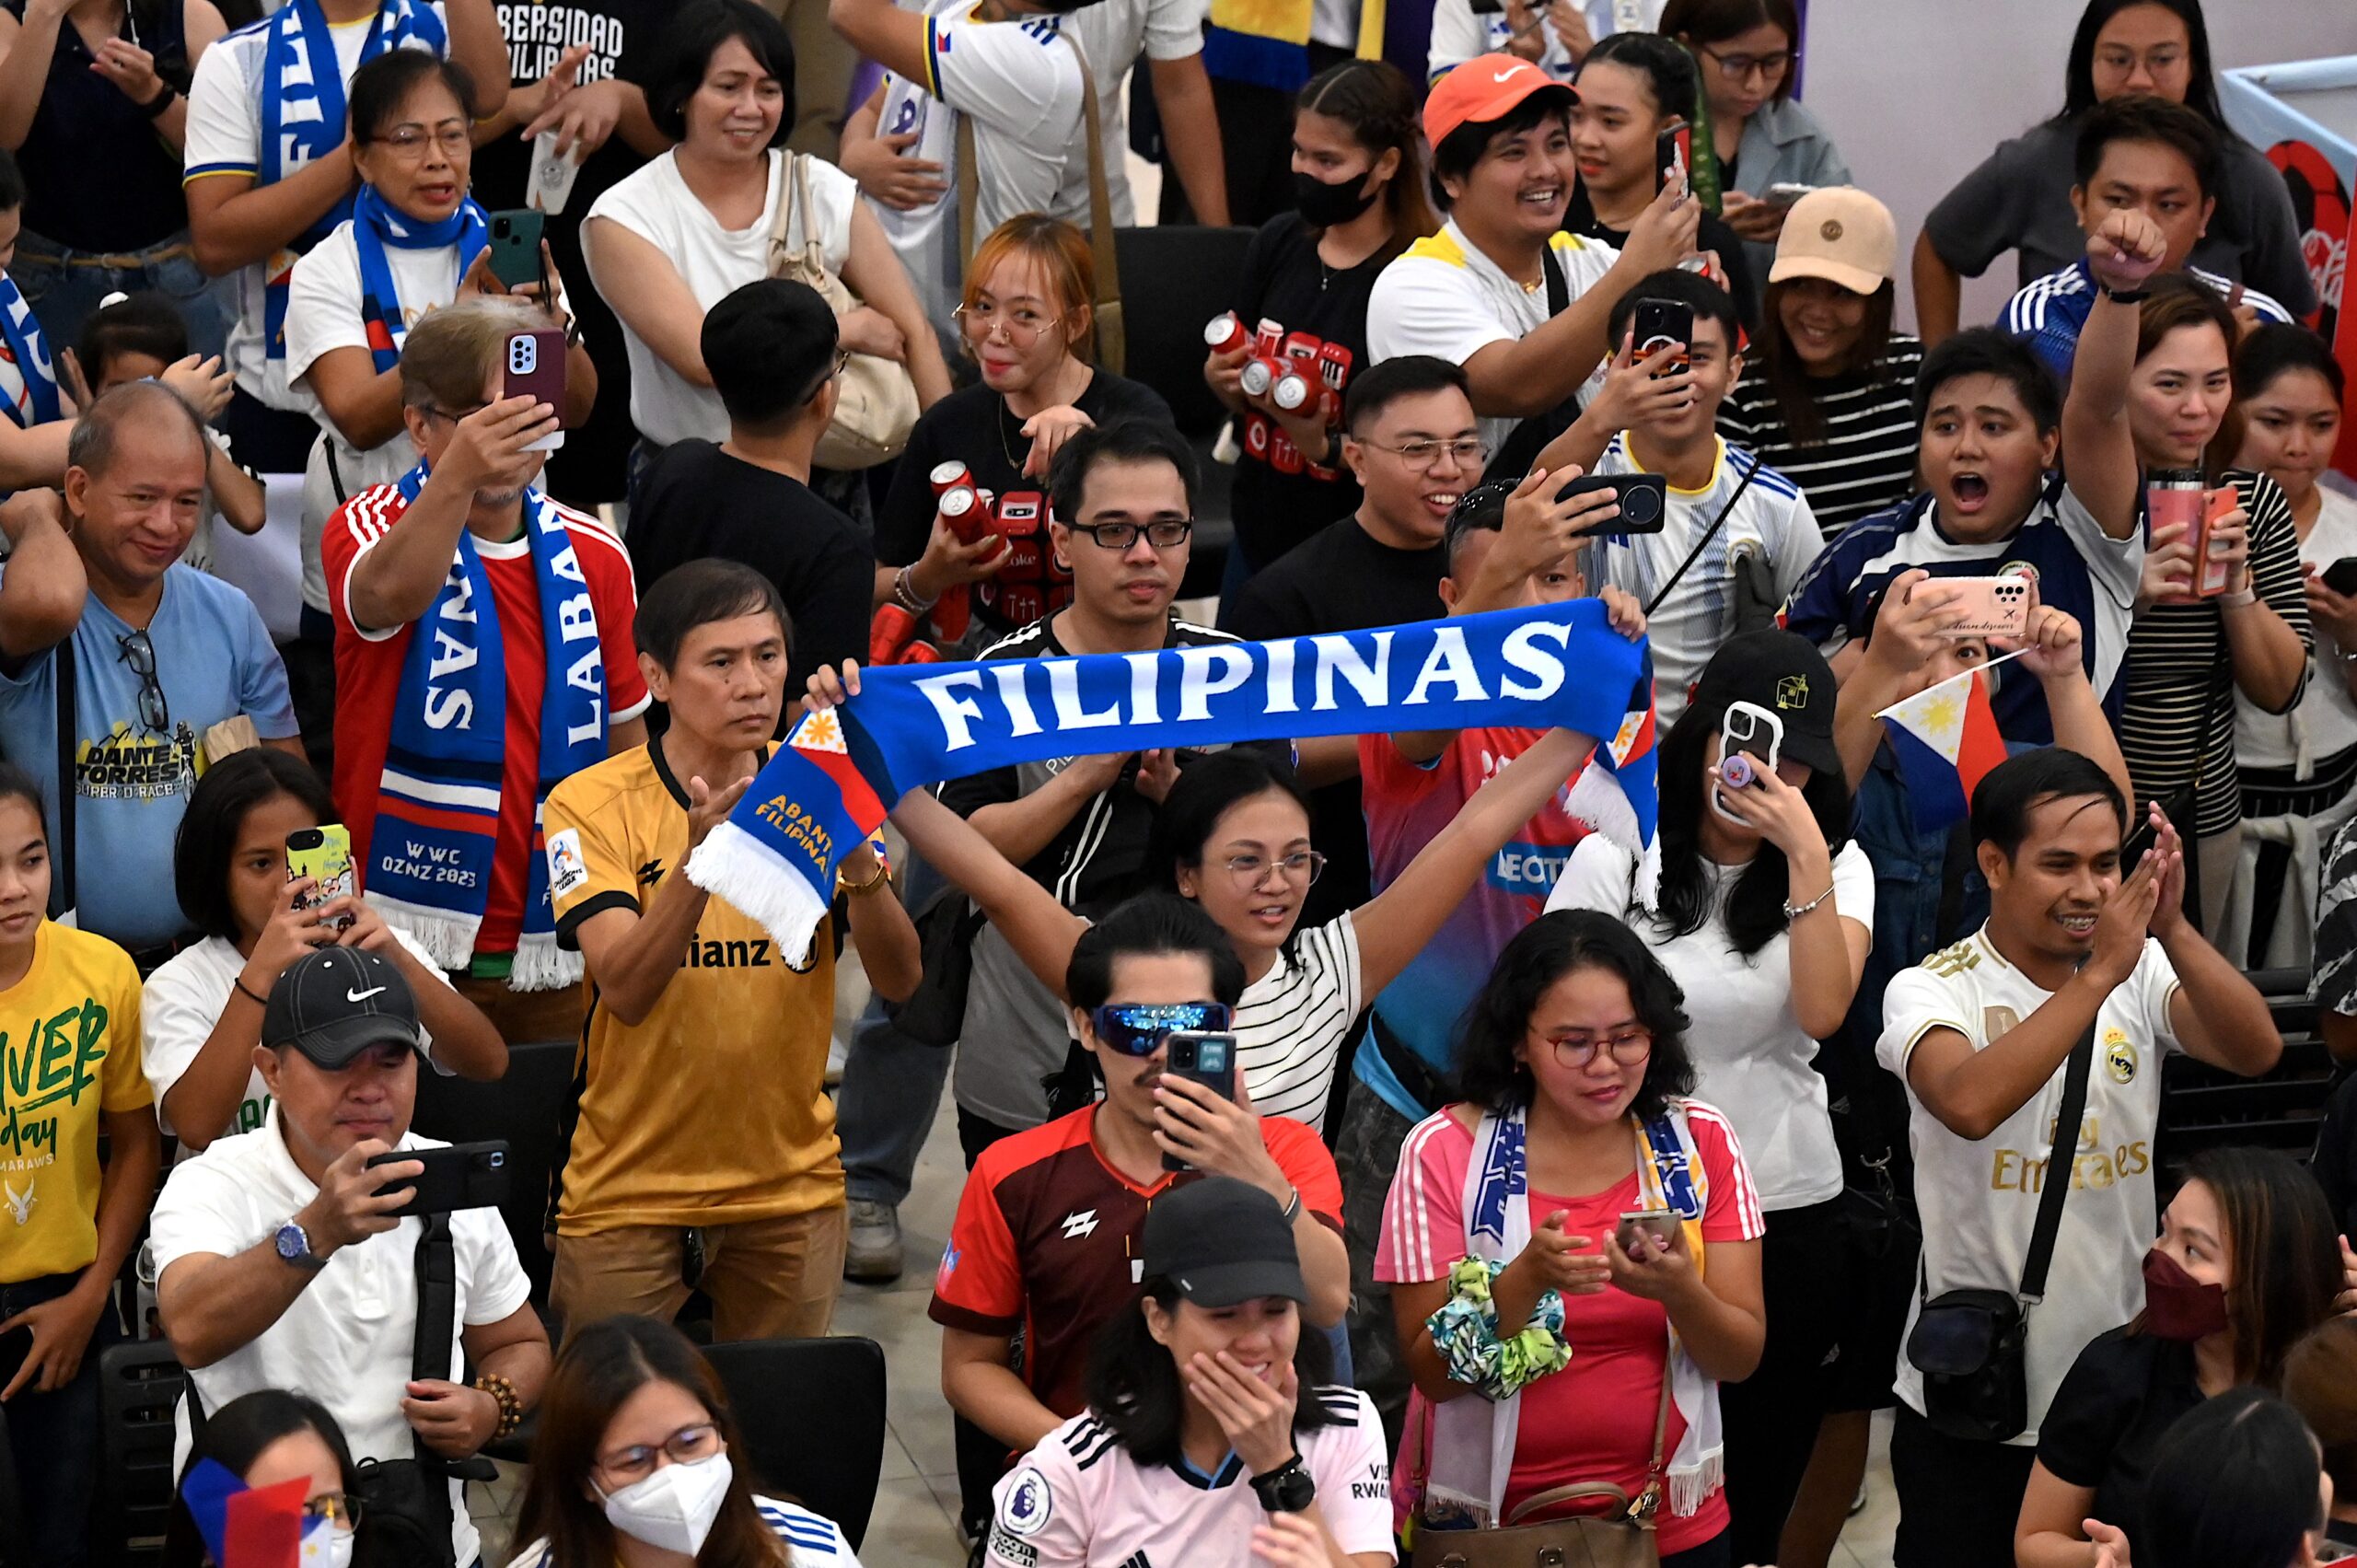 Philippines New Zealand Fifa WOmen's World Cup